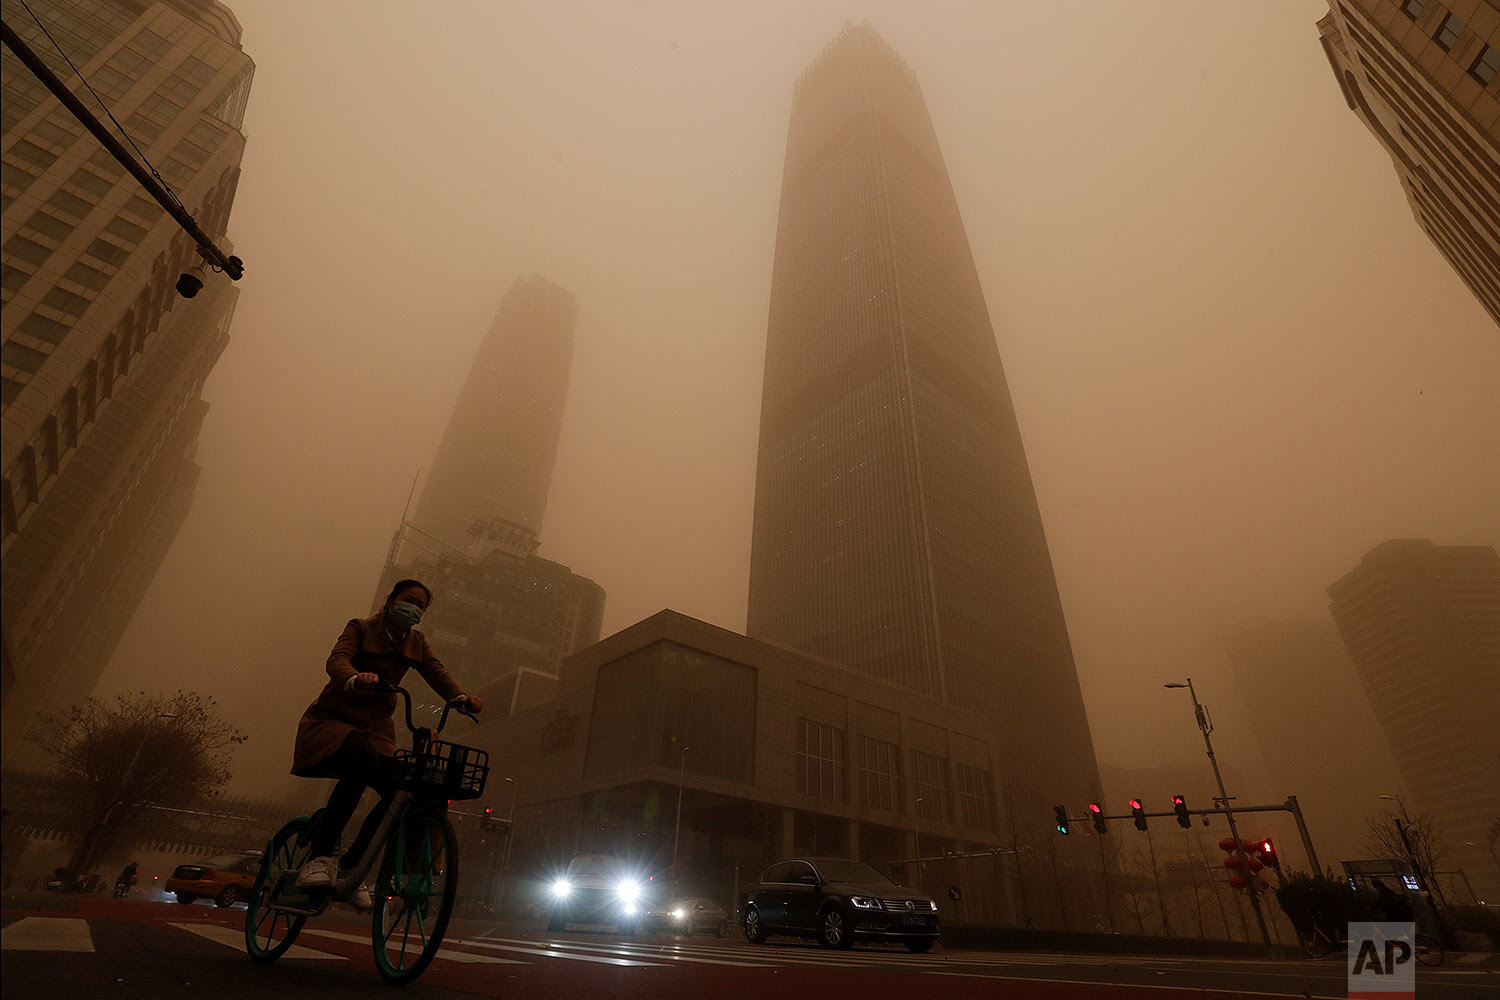  A cyclist and motorists move past office buildings amid a sandstorm during the morning rush hour in the central business district in Beijing, Monday, March 15, 2021.  (AP Photo/Andy Wong) 